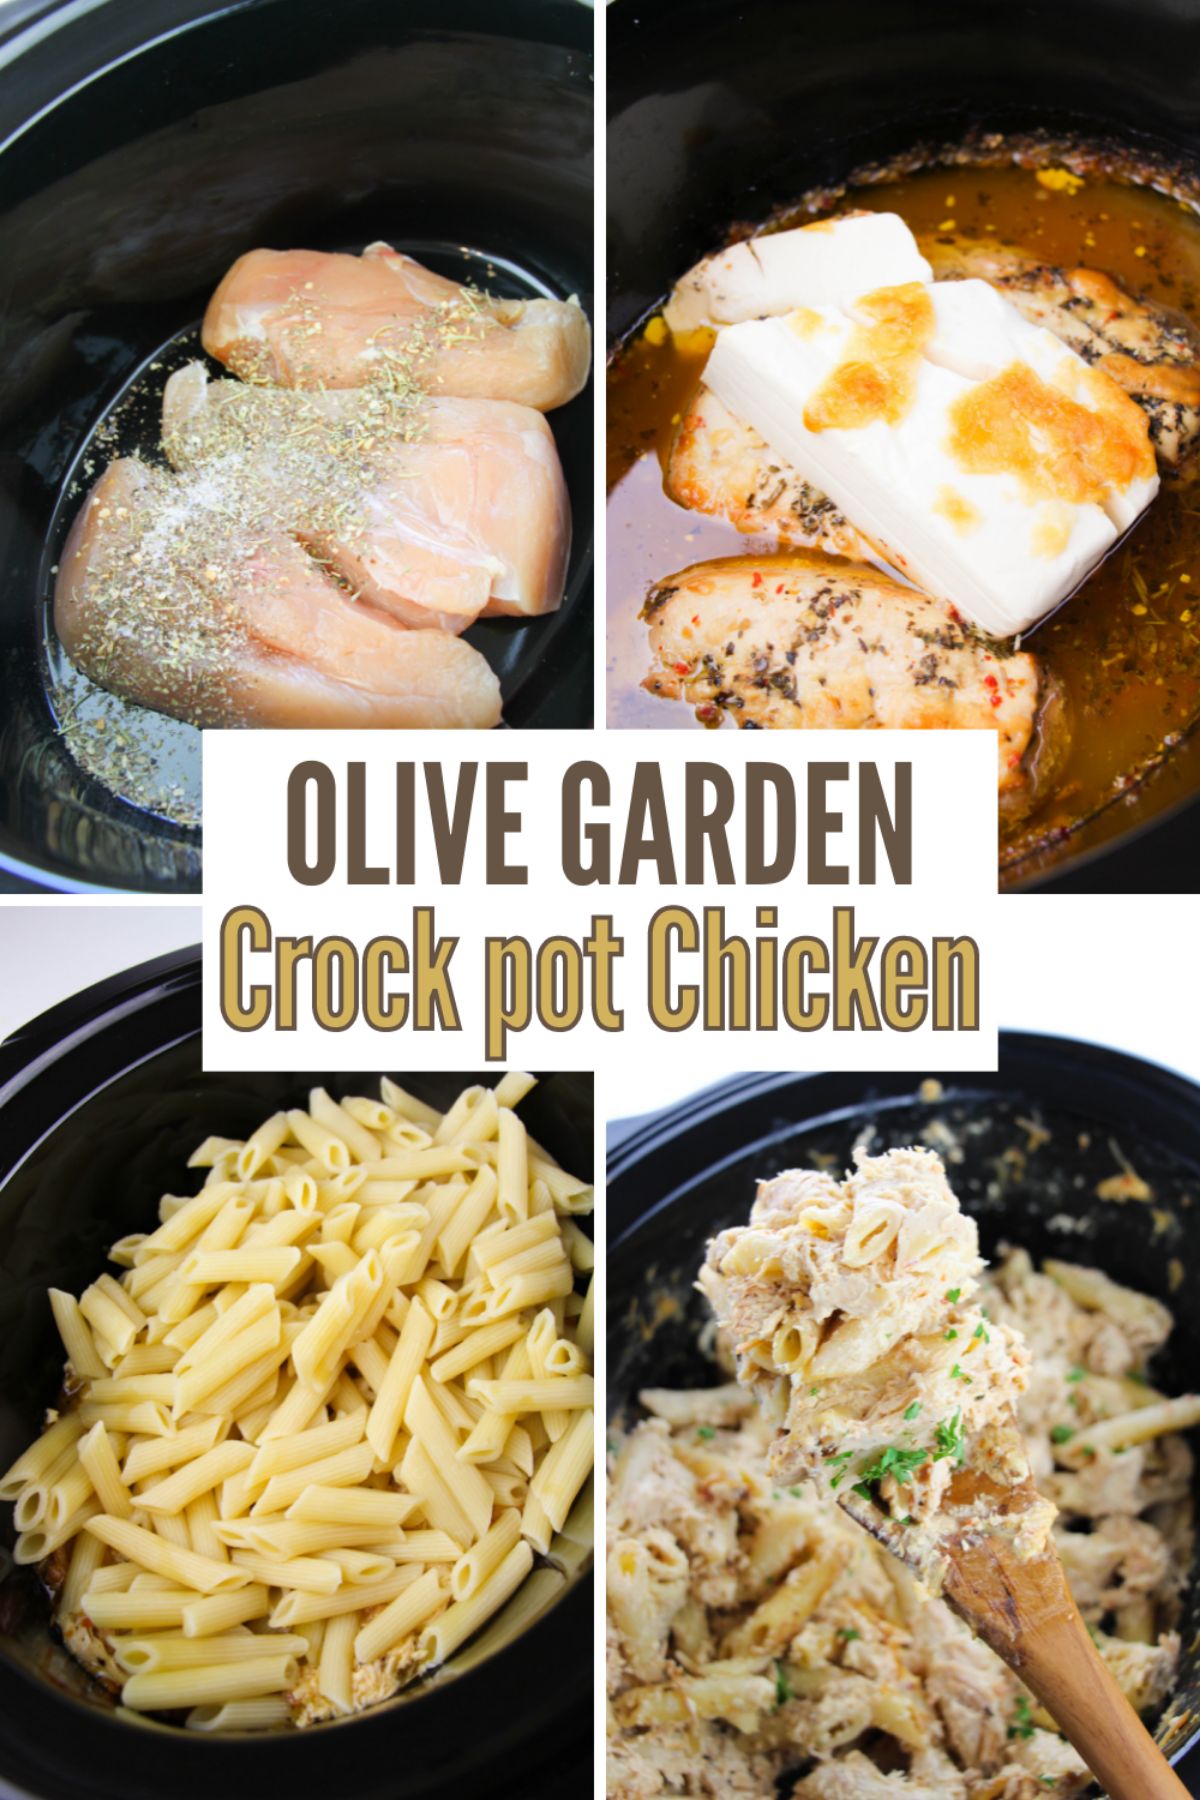 This recipe for Olive Garden Crock Pot Chicken is the perfect weeknight meal. It’s easy to make and doesn’t require a lot of ingredients. #olivegardencrockpotchicken #olivegarden #chicken #olivegardenchicken #crockpot #recipe via @wondermomwannab